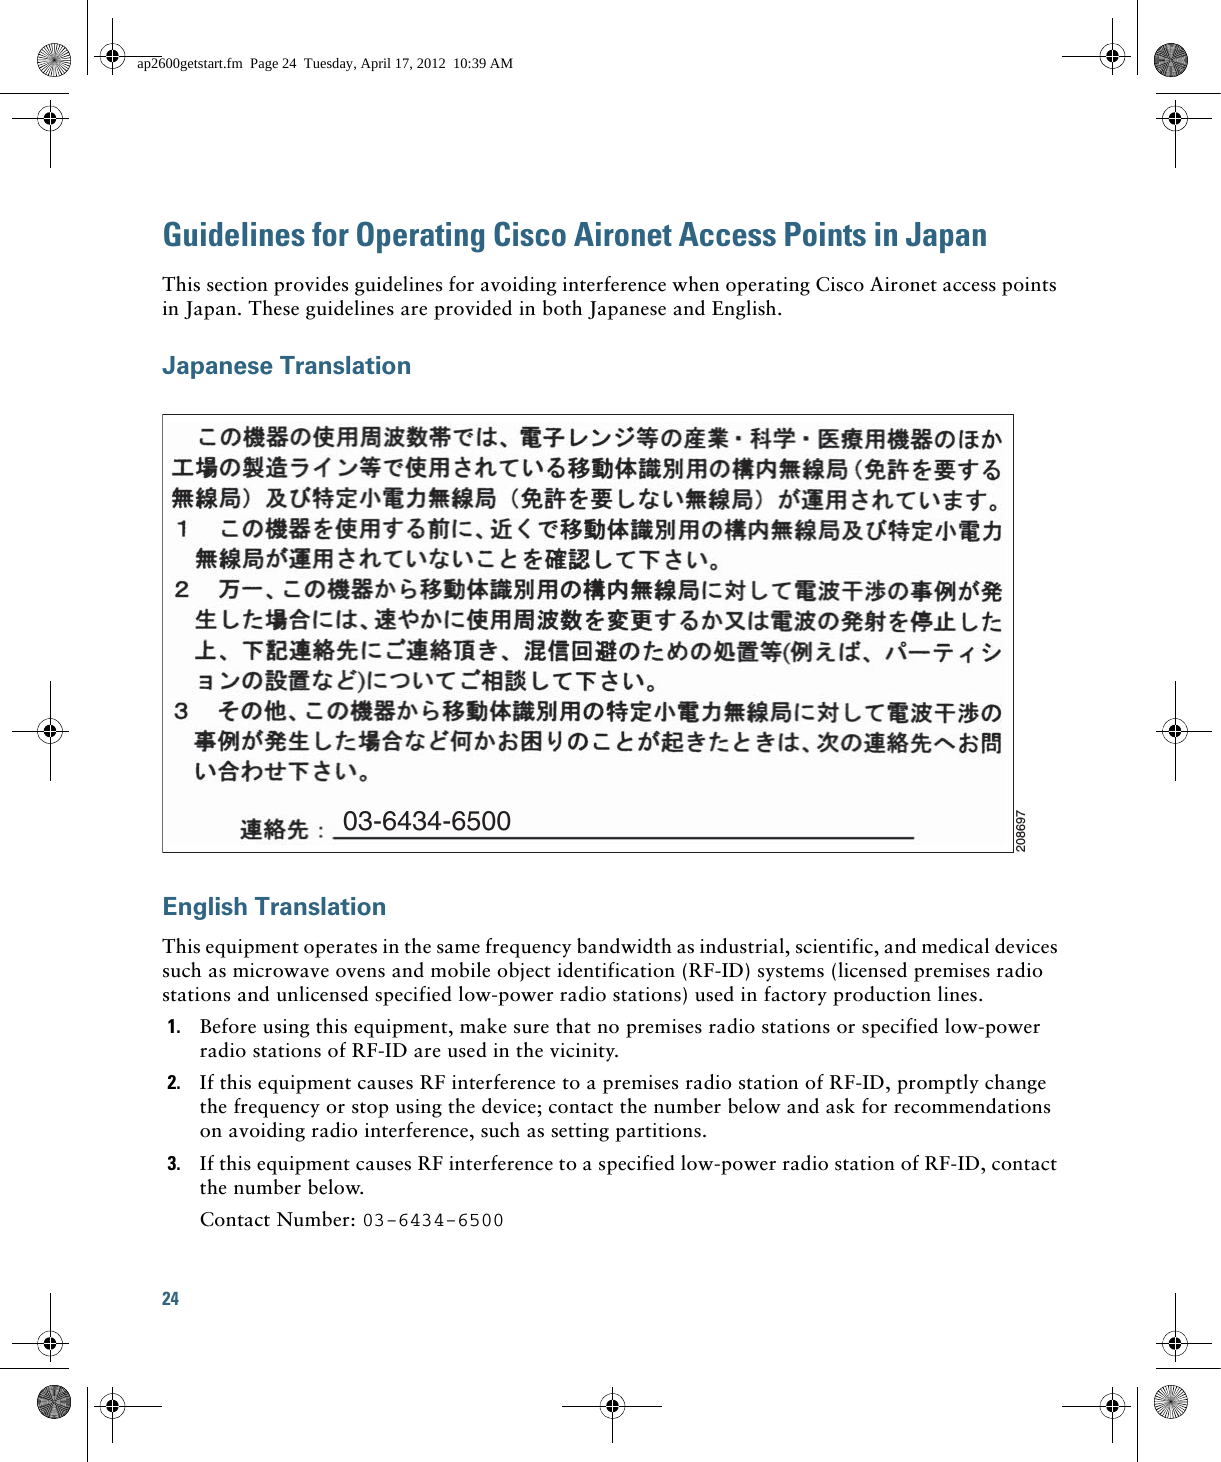 24 Guidelines for Operating Cisco Aironet Access Points in JapanThis section provides guidelines for avoiding interference when operating Cisco Aironet access points in Japan. These guidelines are provided in both Japanese and English.Japanese TranslationEnglish TranslationThis equipment operates in the same frequency bandwidth as industrial, scientific, and medical devices such as microwave ovens and mobile object identification (RF-ID) systems (licensed premises radio stations and unlicensed specified low-power radio stations) used in factory production lines.1. Before using this equipment, make sure that no premises radio stations or specified low-power radio stations of RF-ID are used in the vicinity.2. If this equipment causes RF interference to a premises radio station of RF-ID, promptly change the frequency or stop using the device; contact the number below and ask for recommendations on avoiding radio interference, such as setting partitions.3. If this equipment causes RF interference to a specified low-power radio station of RF-ID, contact the number below.Contact Number: 03-6434-650003-6434-6500208697ap2600getstart.fm  Page 24  Tuesday, April 17, 2012  10:39 AM